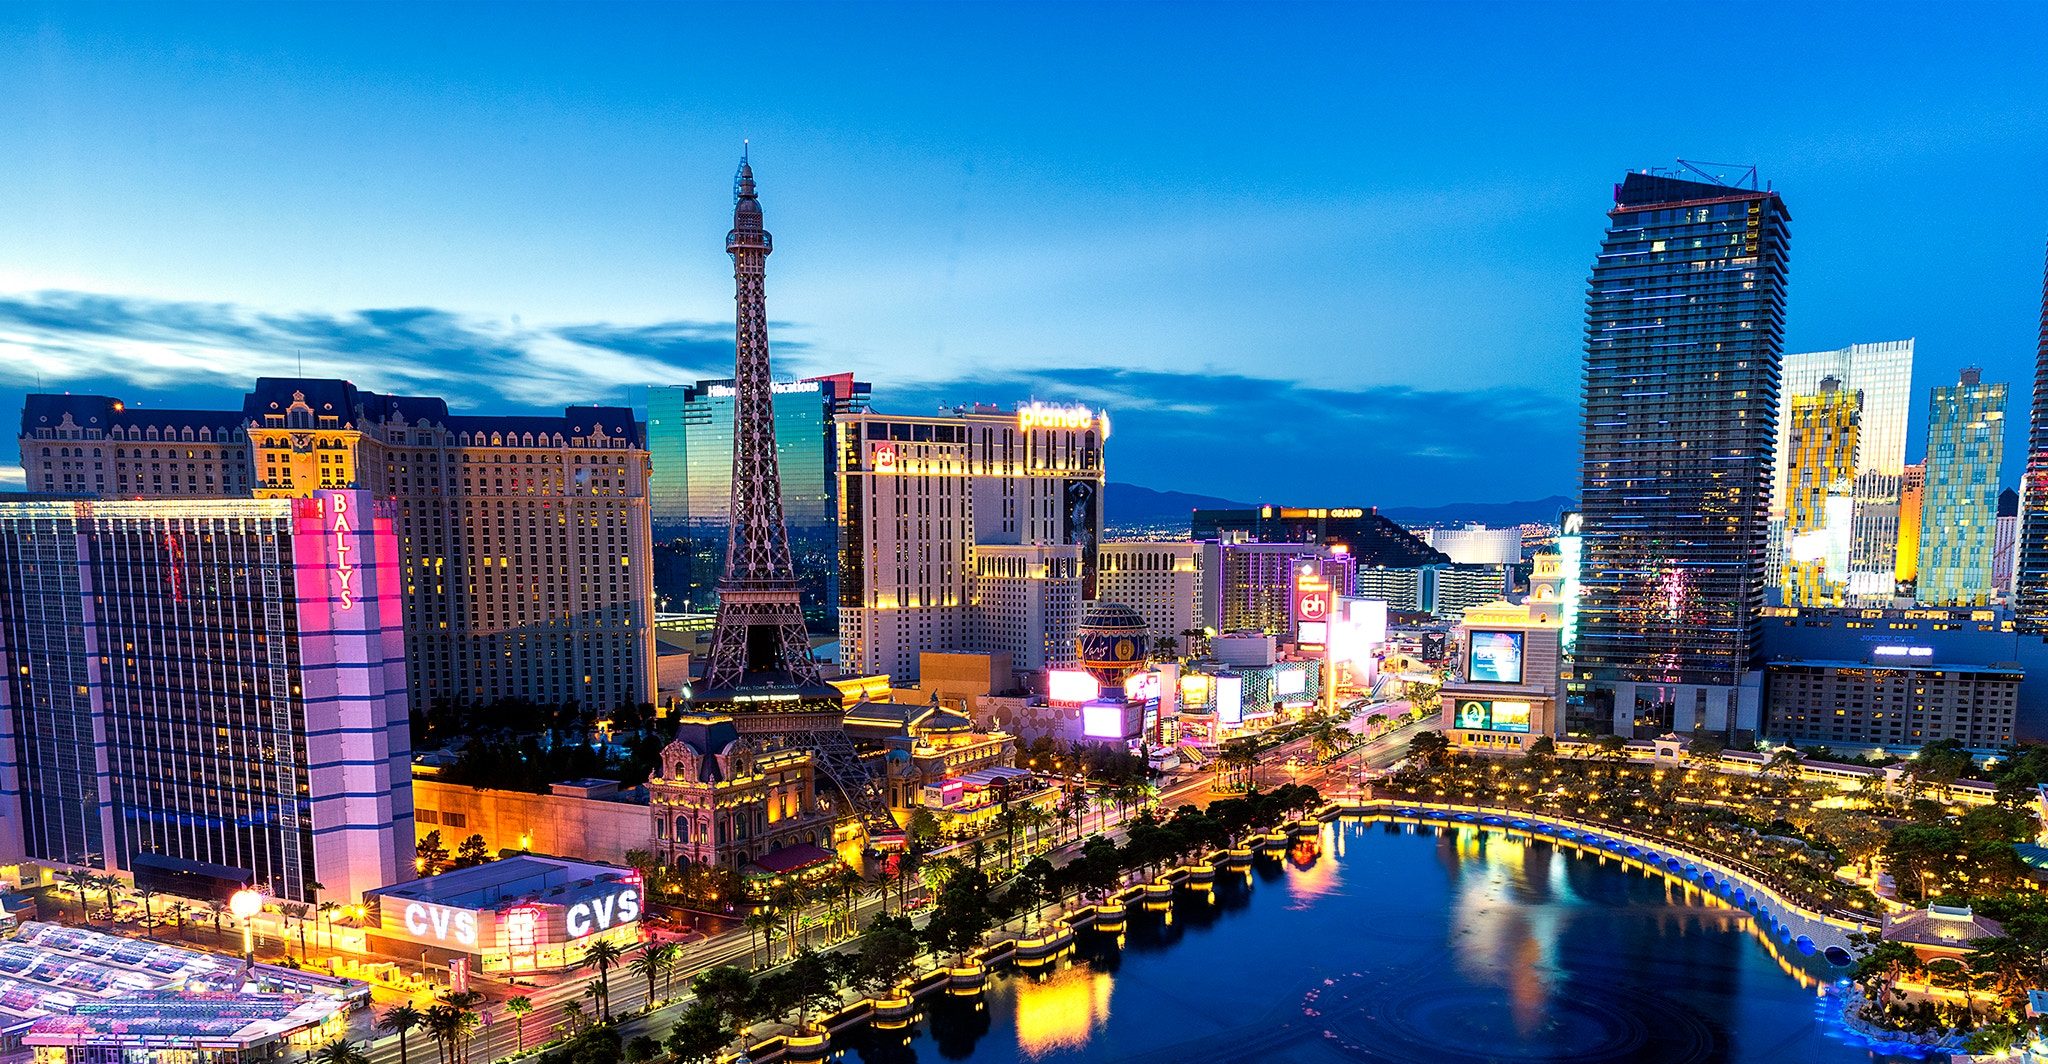 Flight Deal: Nonstop From New York To Las Vegas For $218 Round-Trip